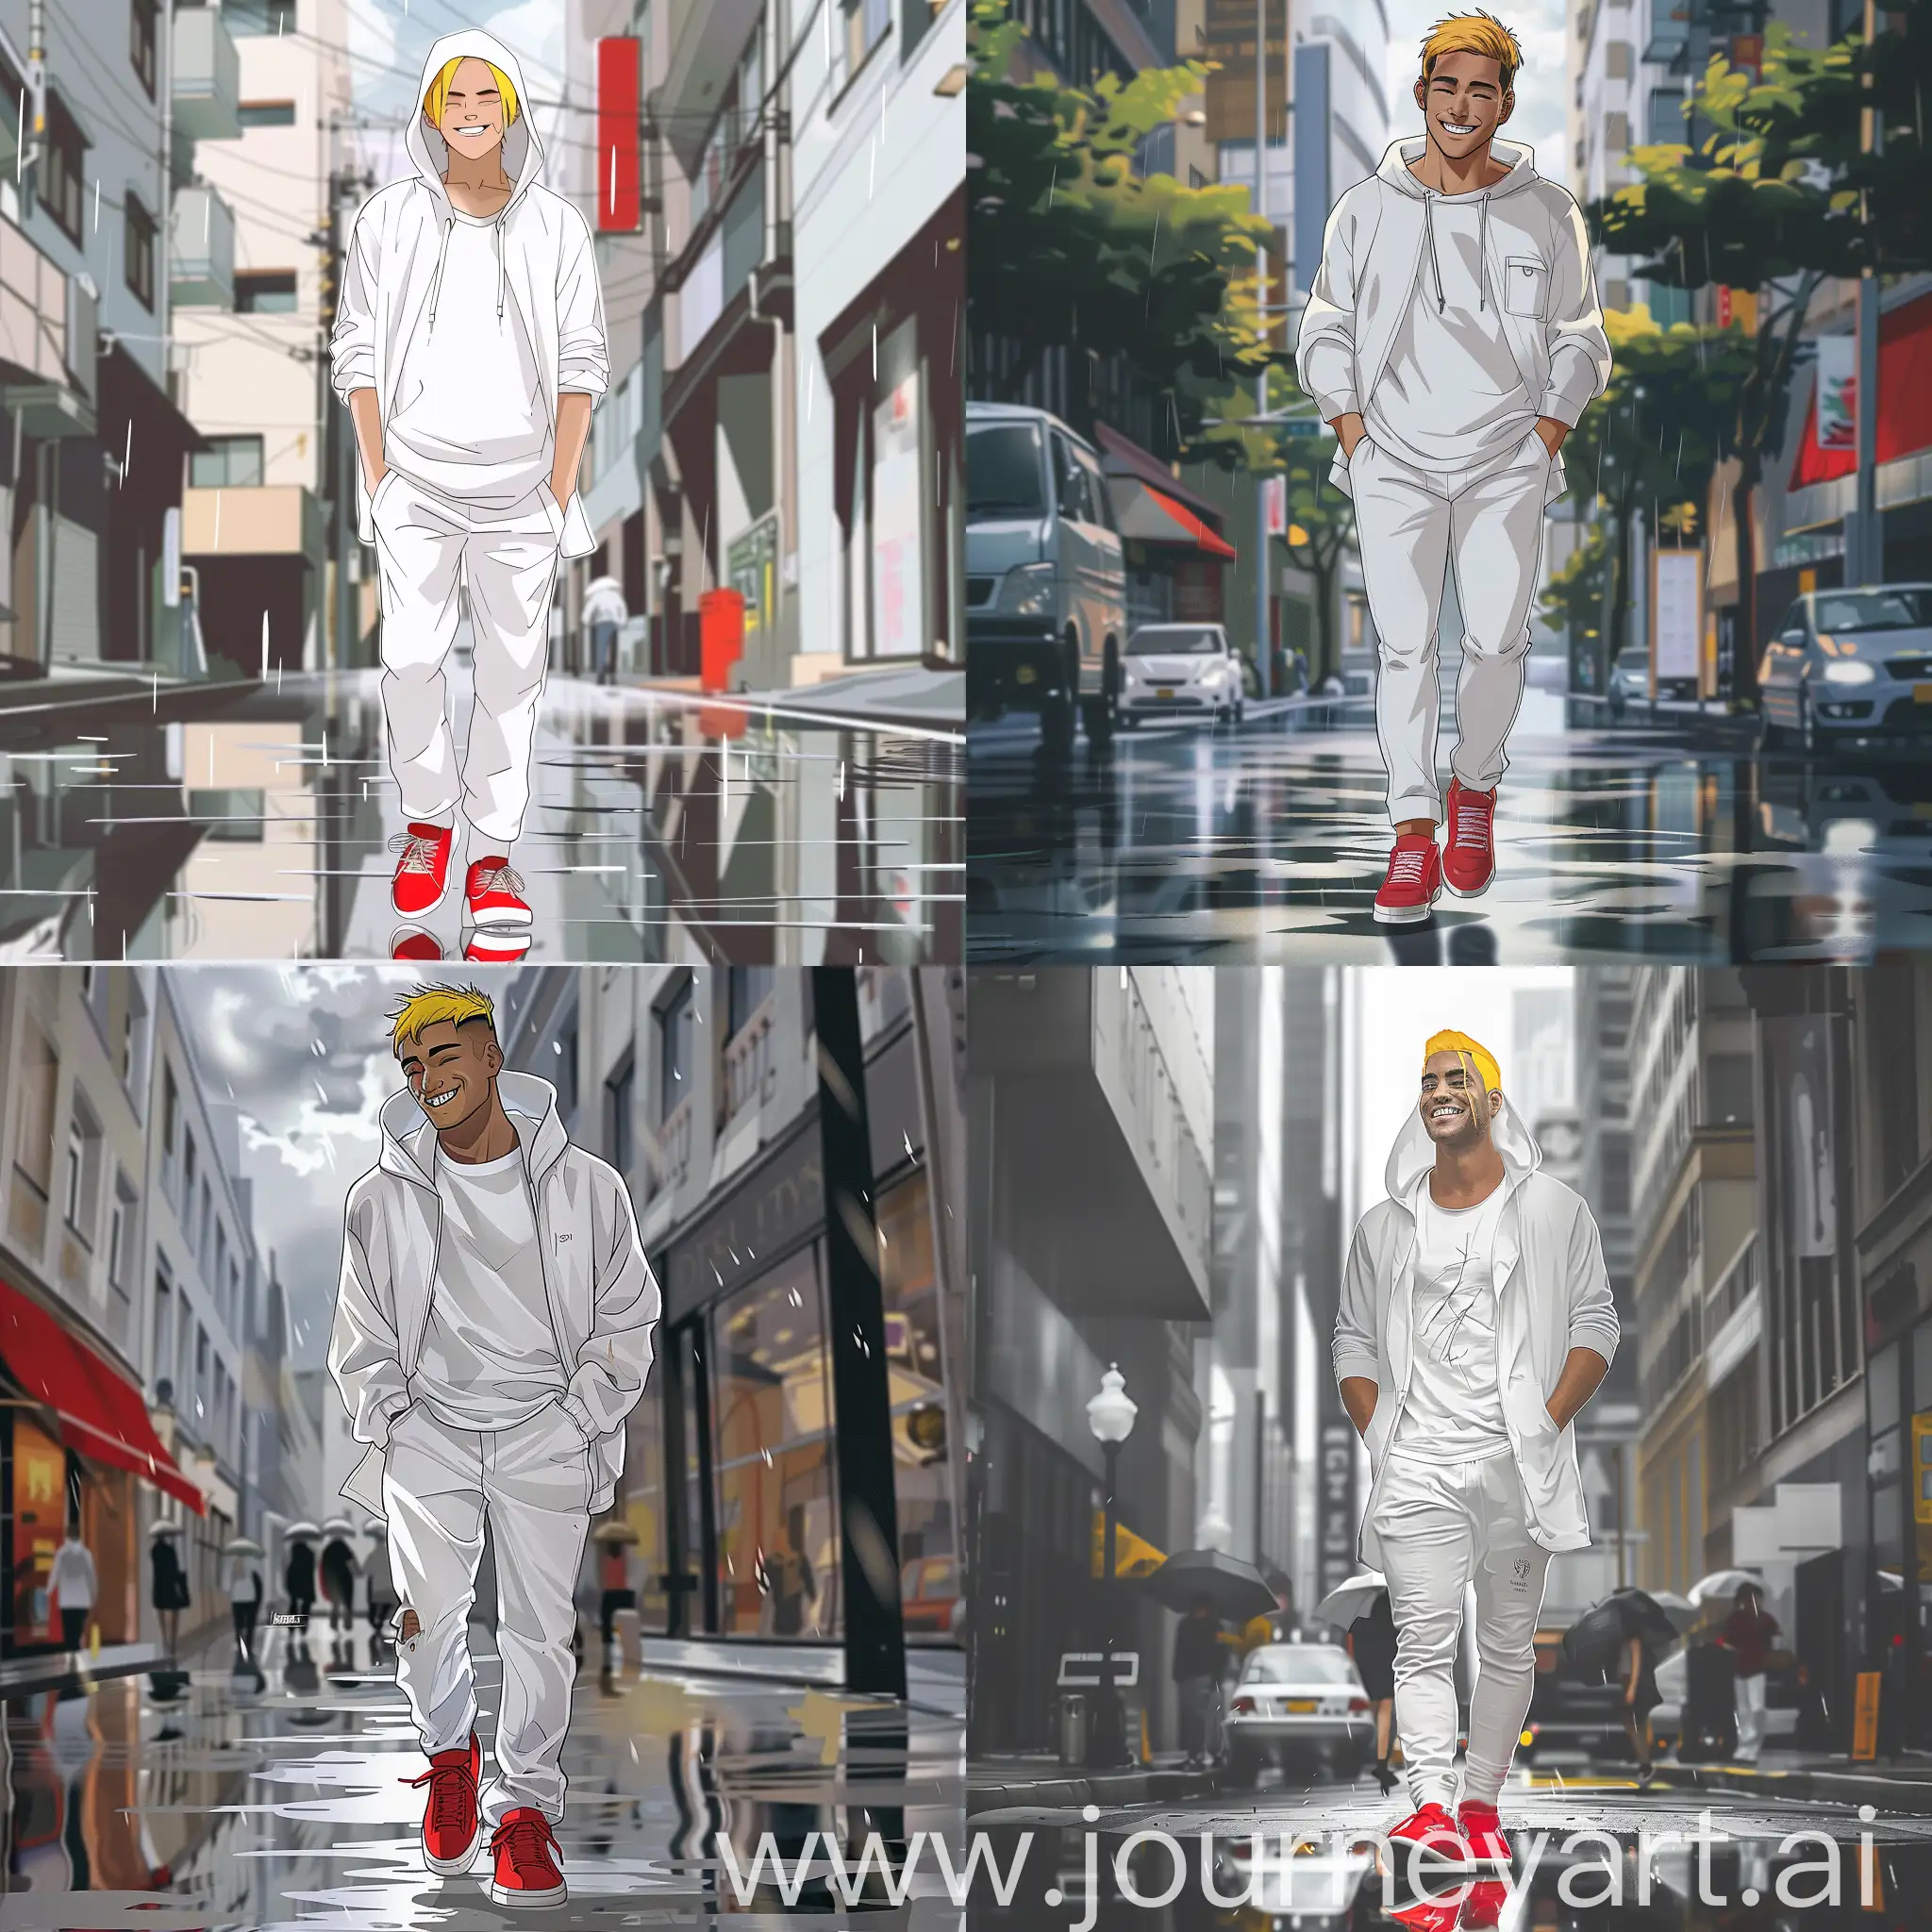 A man of mesomorphic physique tall height short yellow hair smiling closed eyes dressed in white hoodie under hoodie  white t-shirt white  pants on his feet red sneakers walking down the street with his hands in his pockets rainy city, anime style